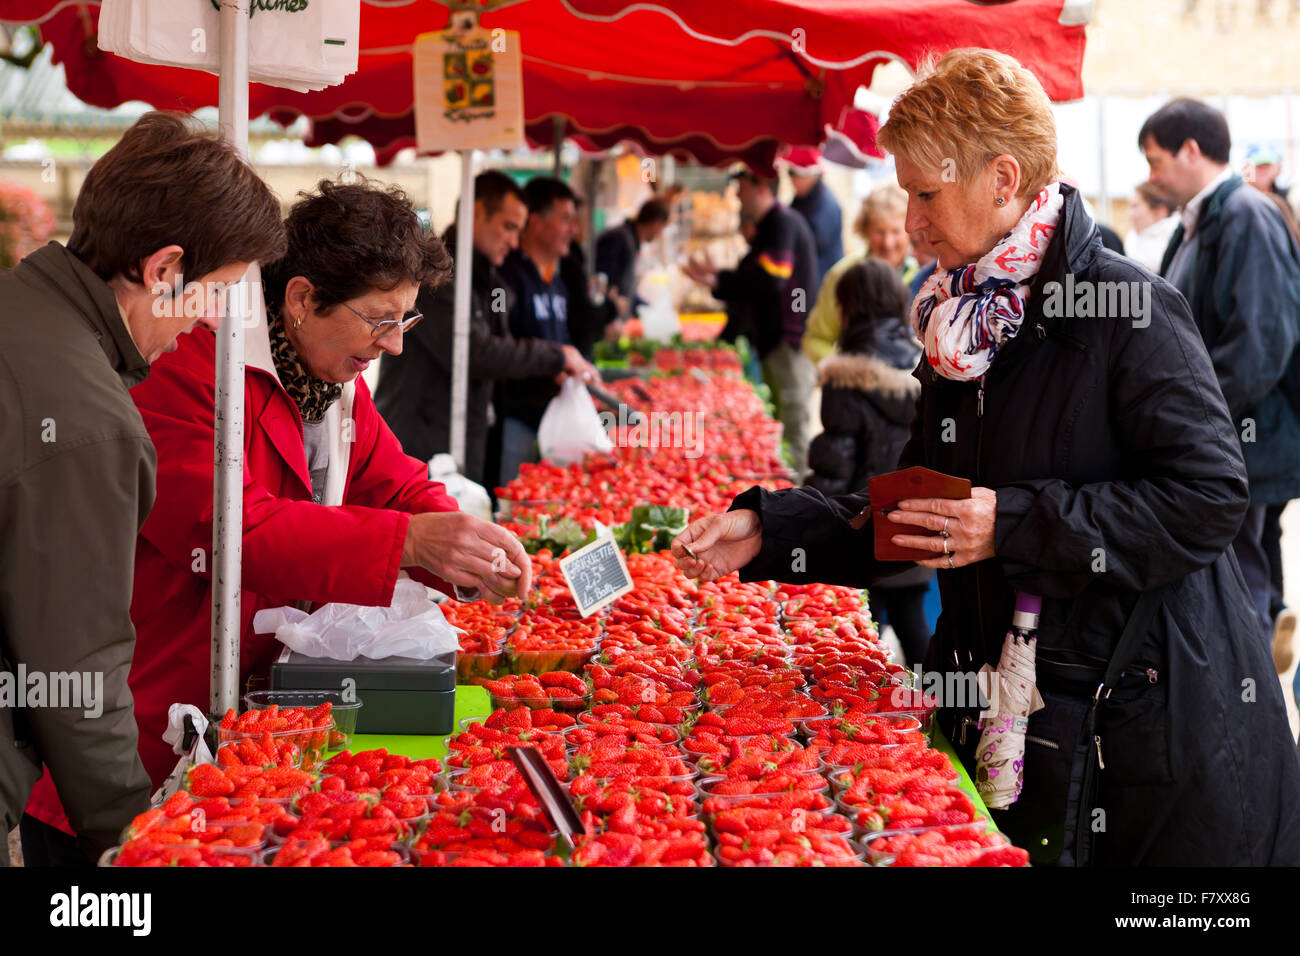 Buying strawberries at the local fete Stock Photo